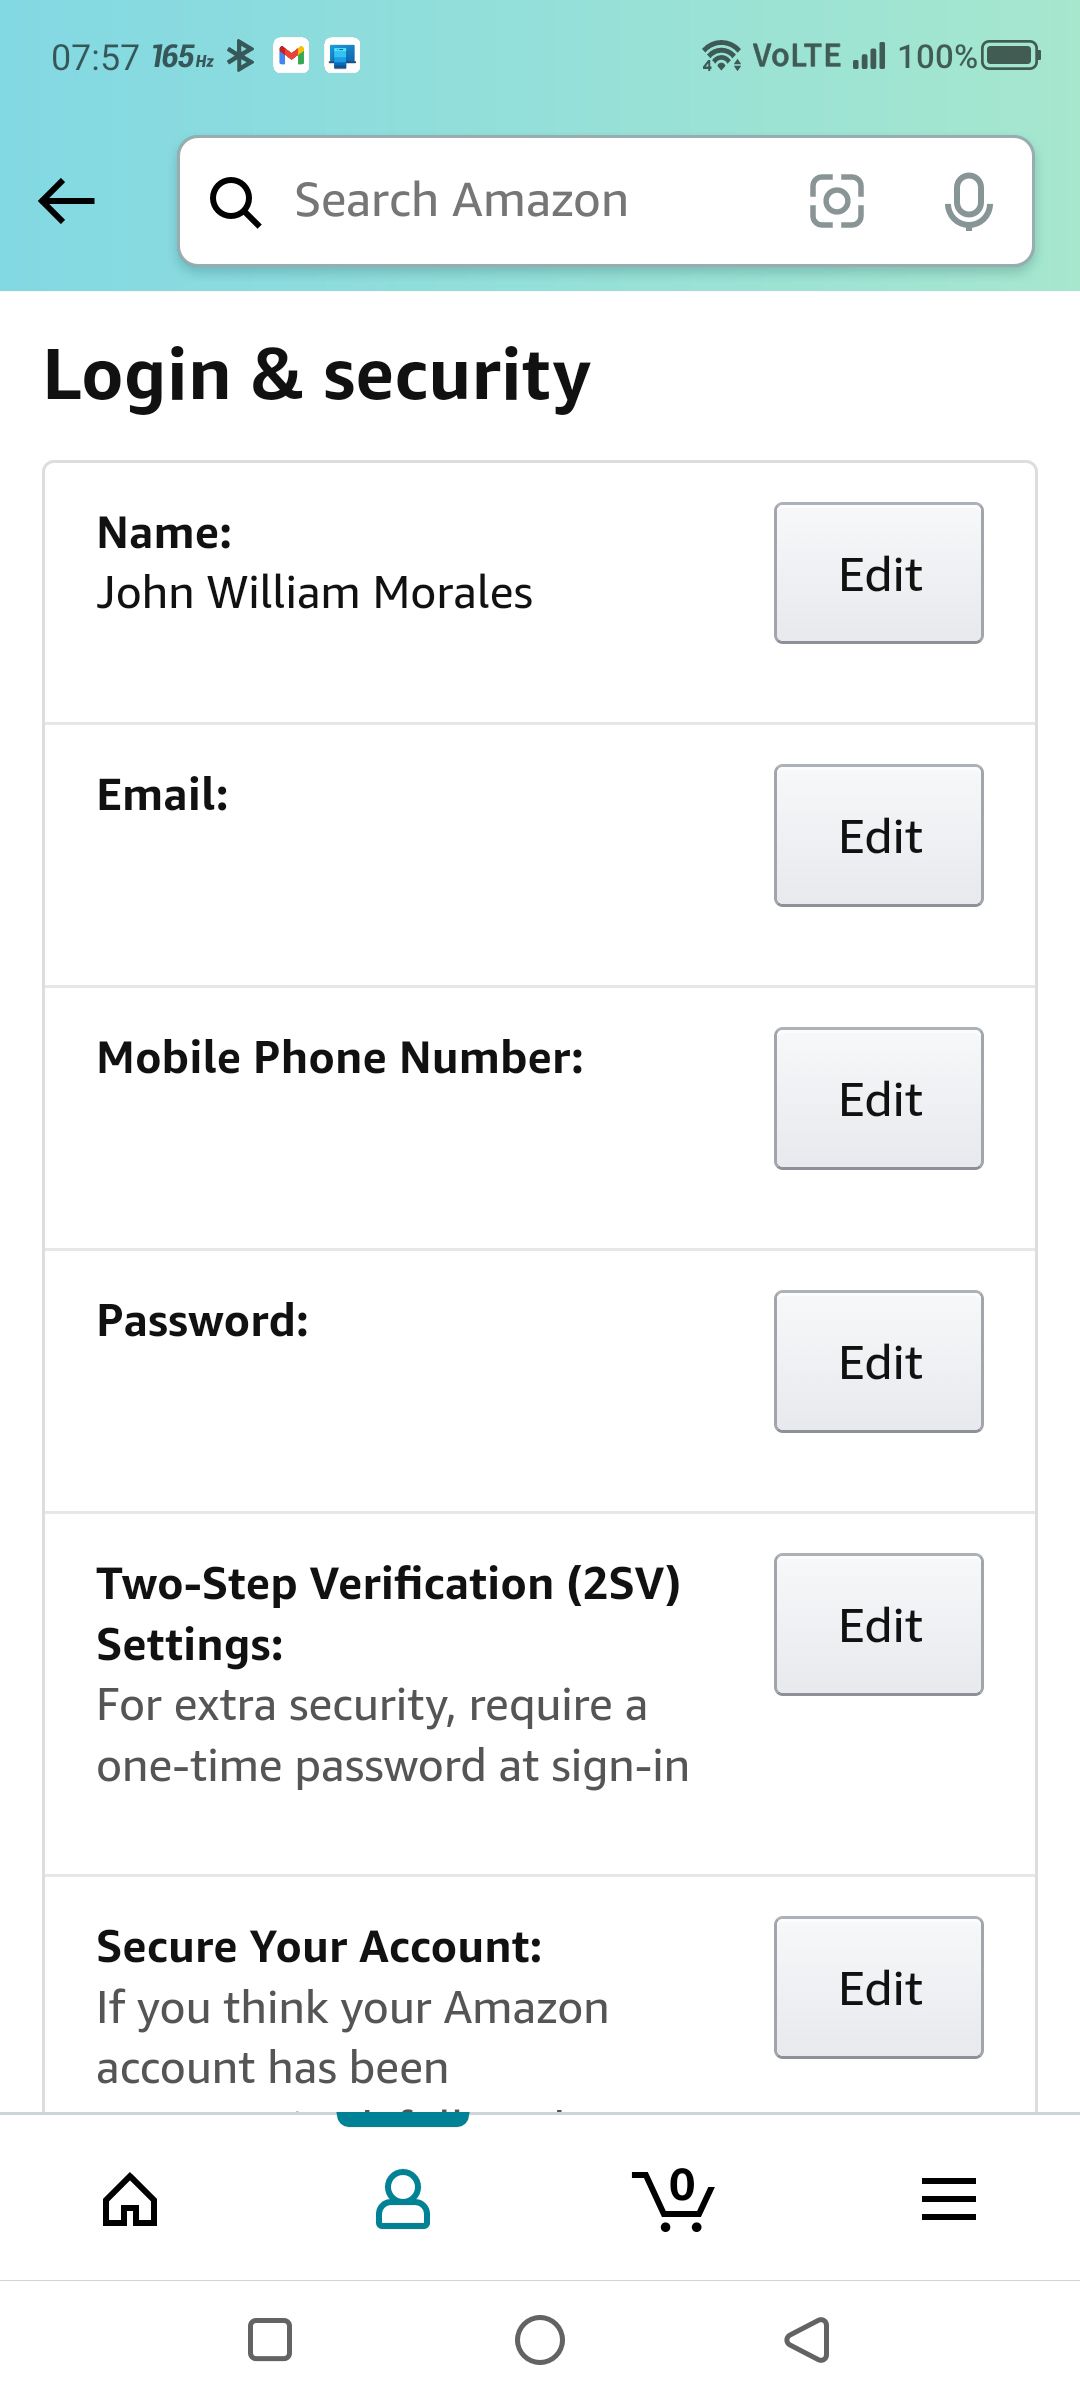 Login and security settings on Amazon